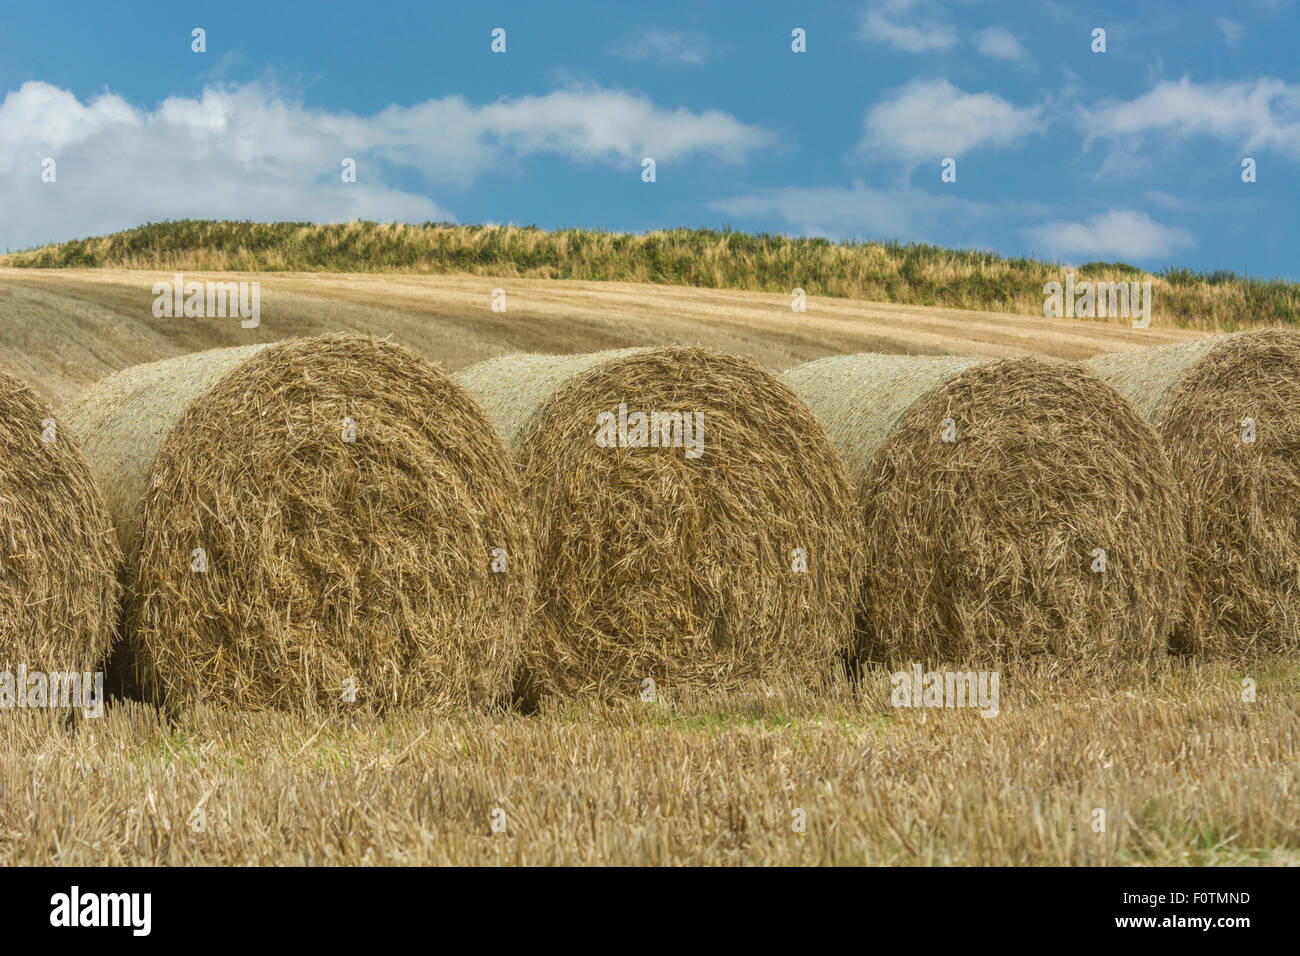 Hay / straw bales and stubble field after harvested cereal crop. Focus on front faces of bales. Metaphor food security / growing food, farm subsidies. Stock Photo